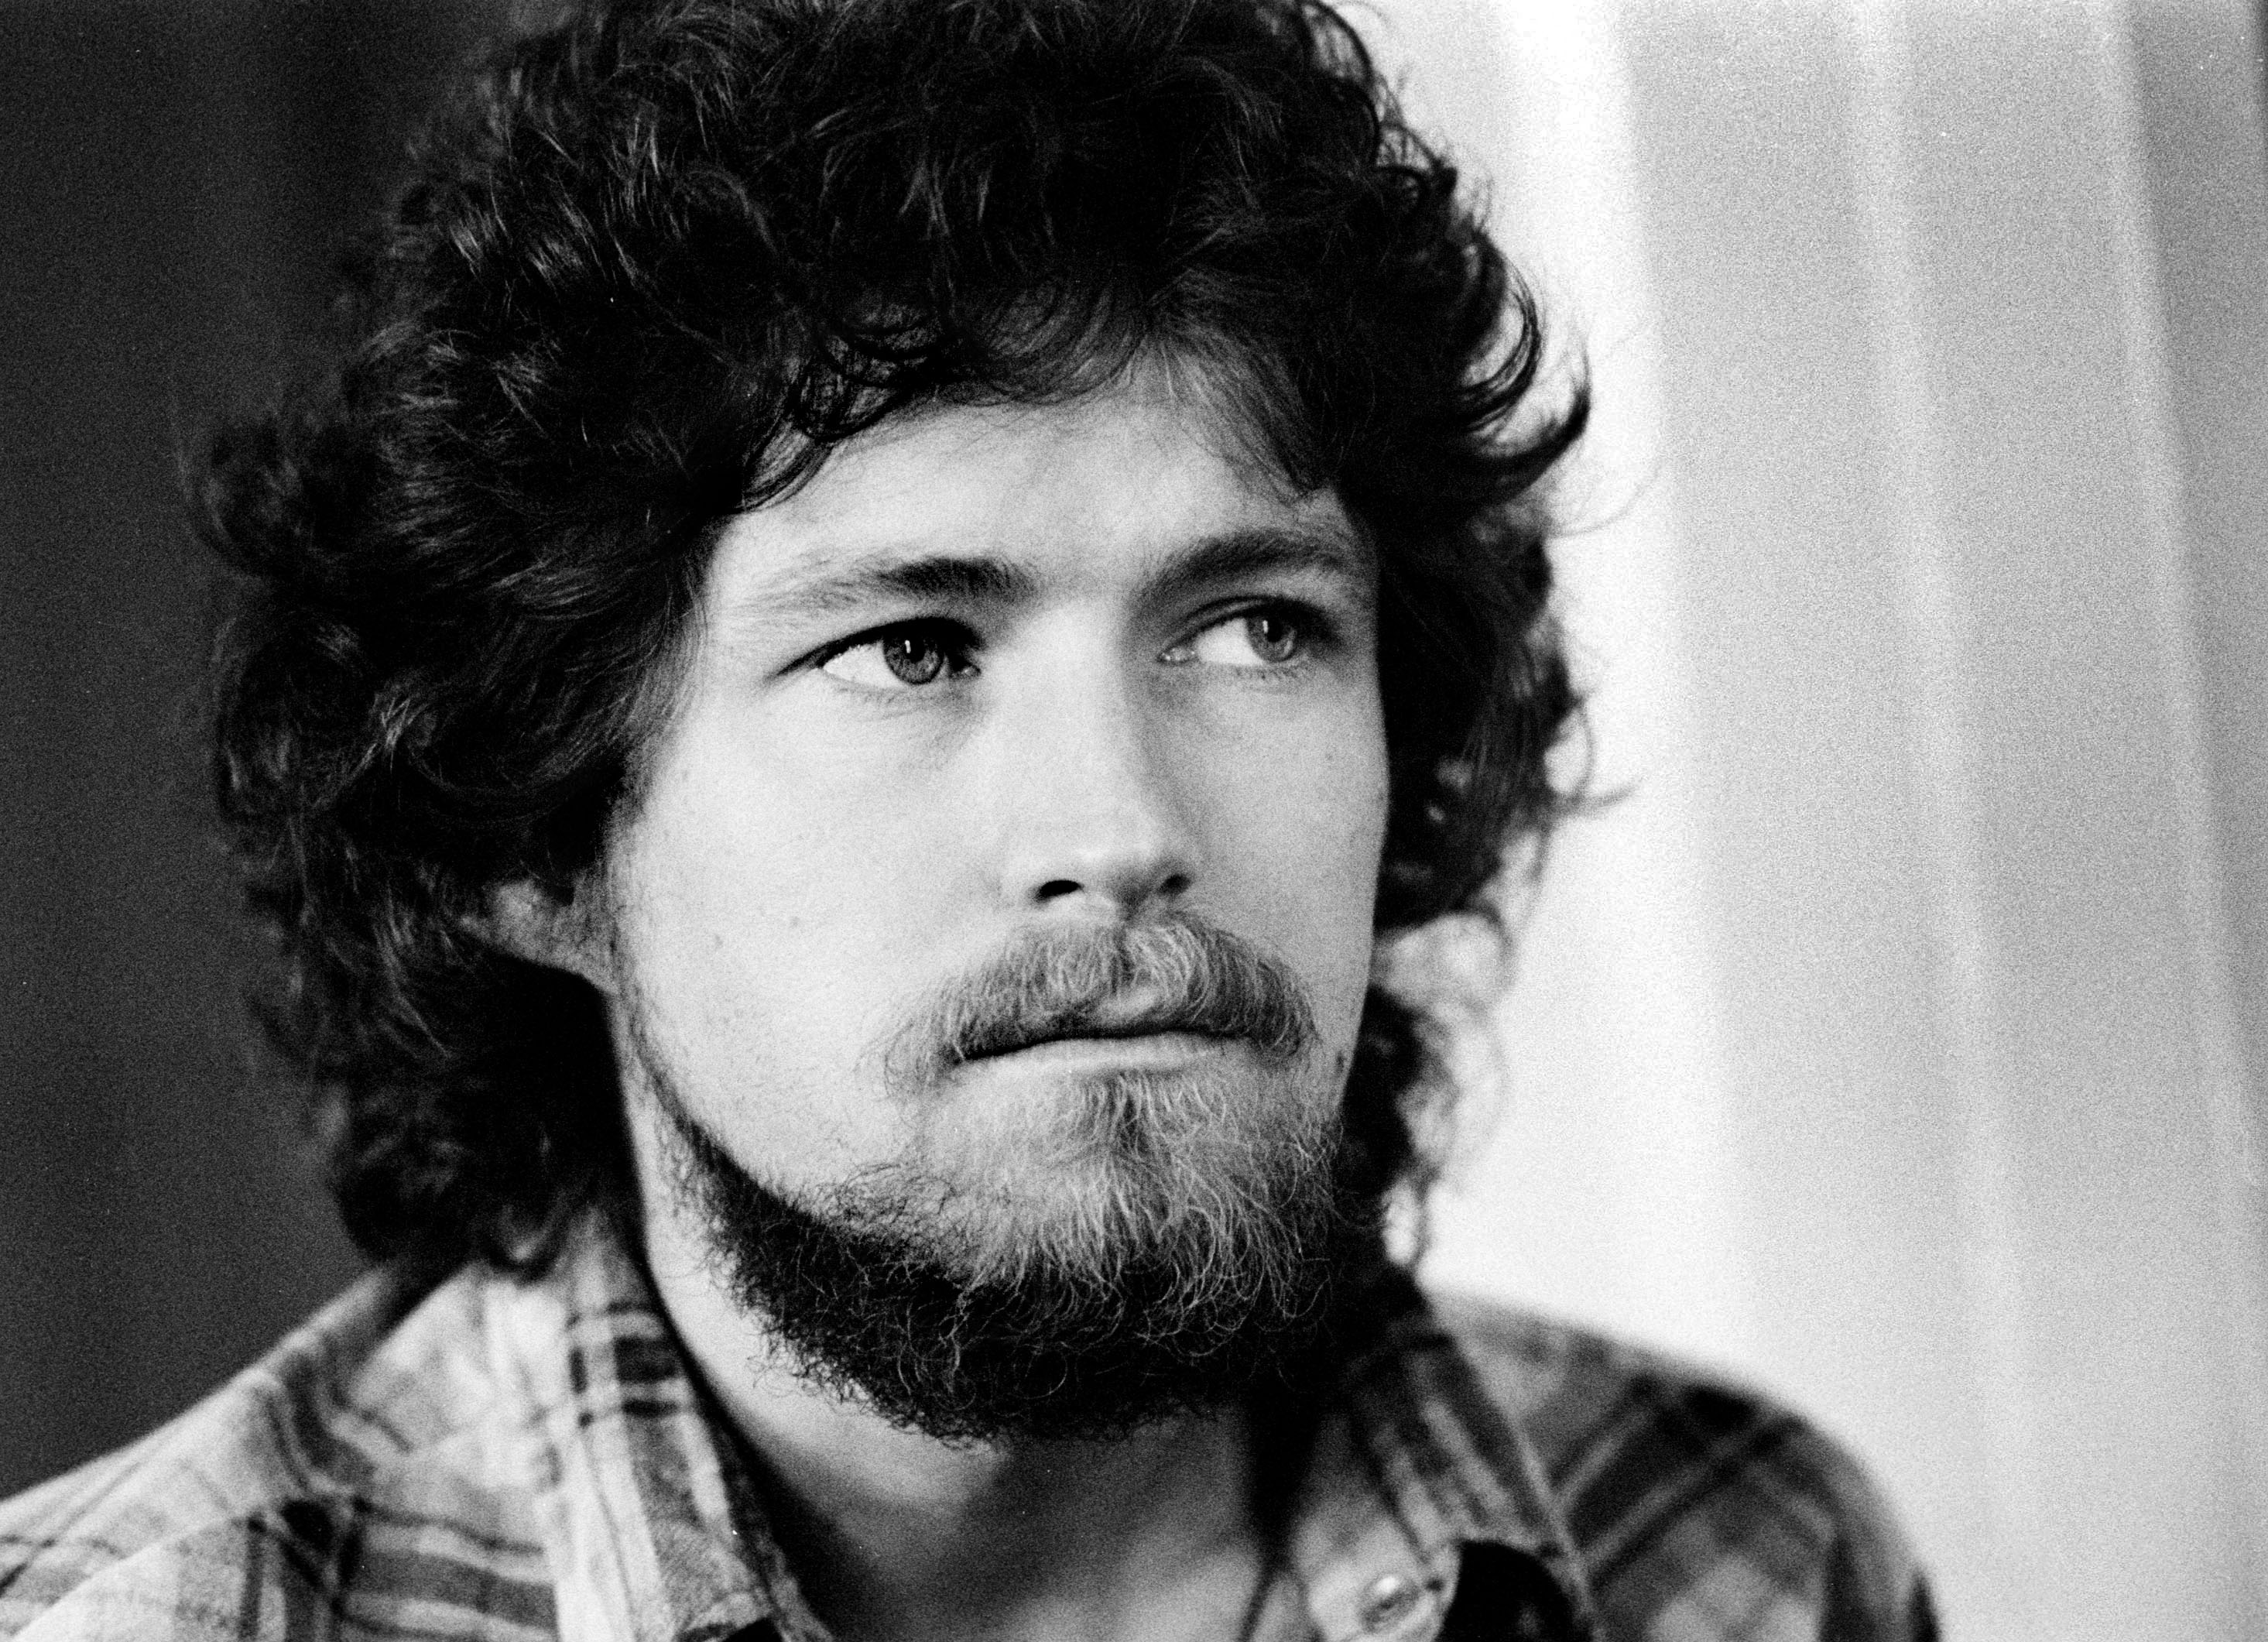 The Eagles' Don Henley wearing flannel